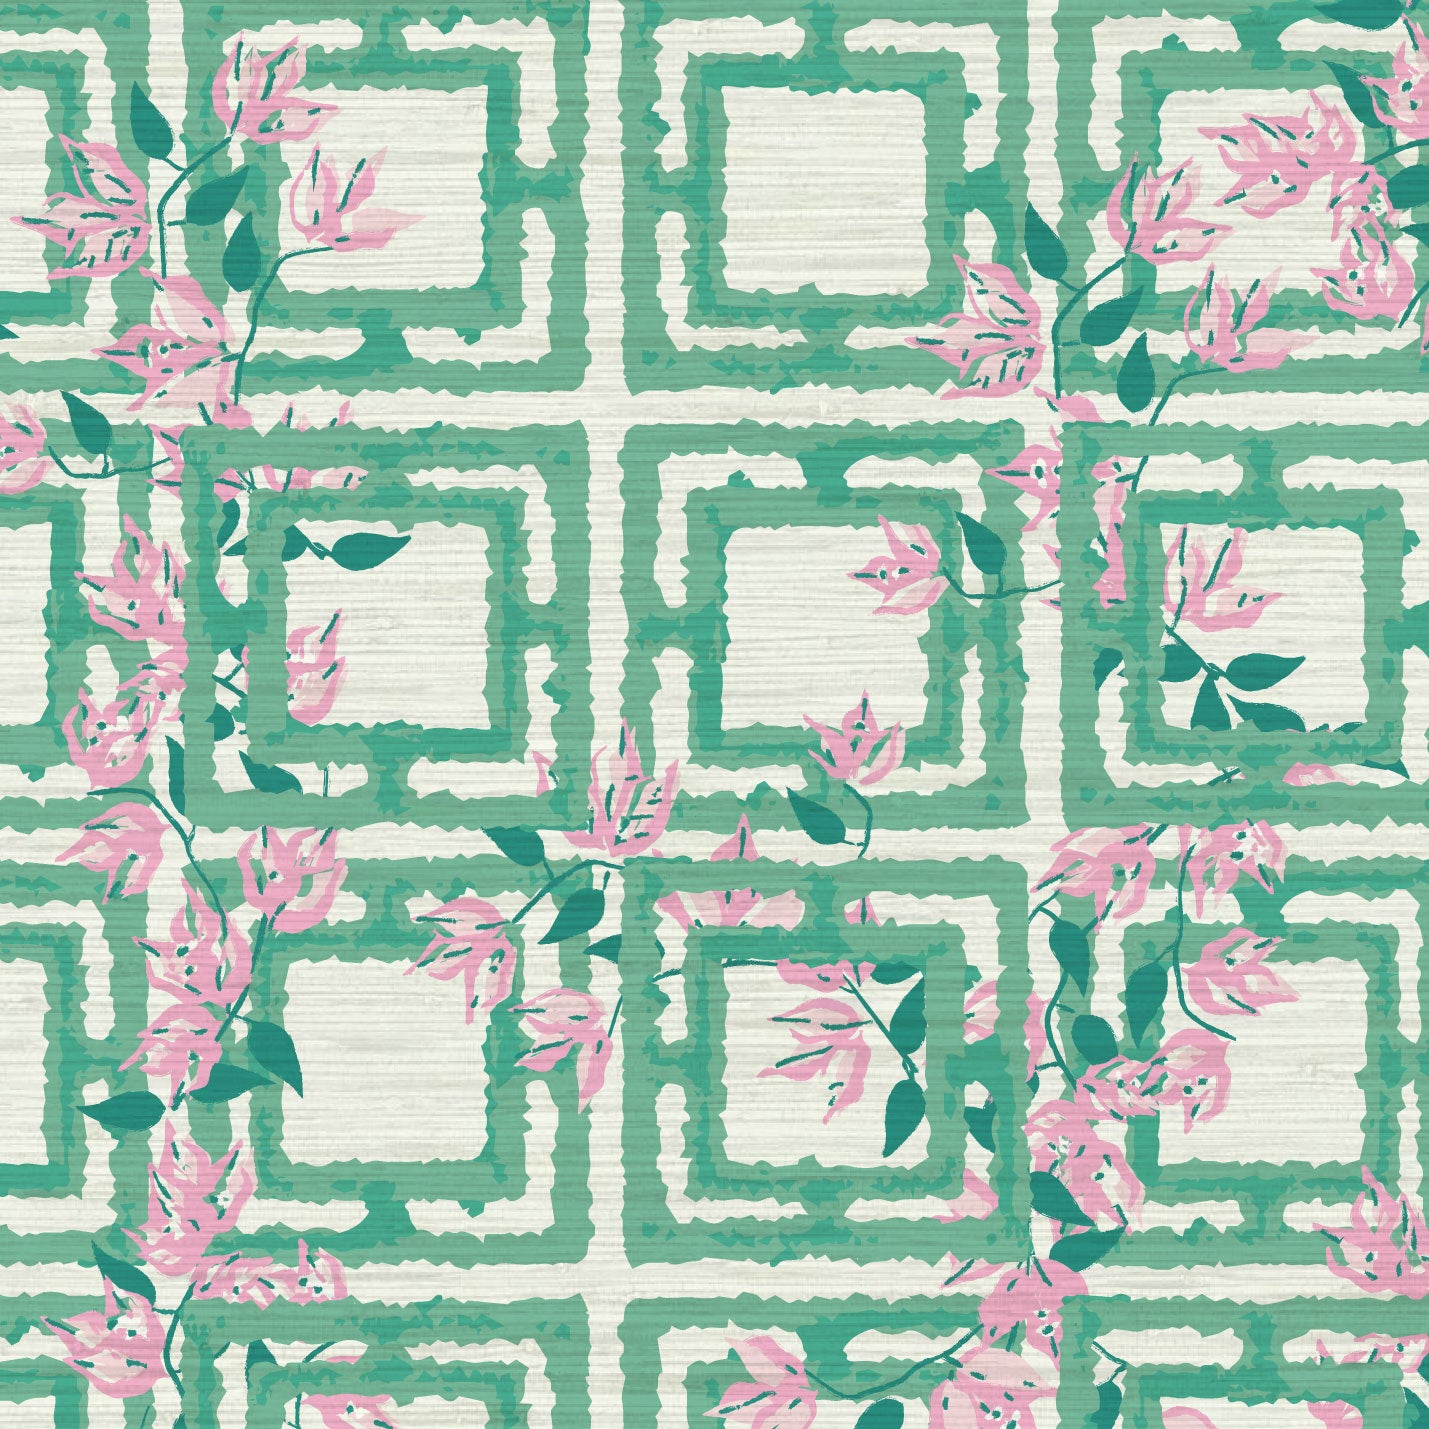 Grasscloth wallpaper Natural Textured Eco-Friendly Non-toxic High-quality  Sustainable Interior Design Bold Custom Tailor-made Retro chic Grand millennial Maximalism  Traditional Dopamine decor garden flower geometric retro green pink girl kids preppy cabana